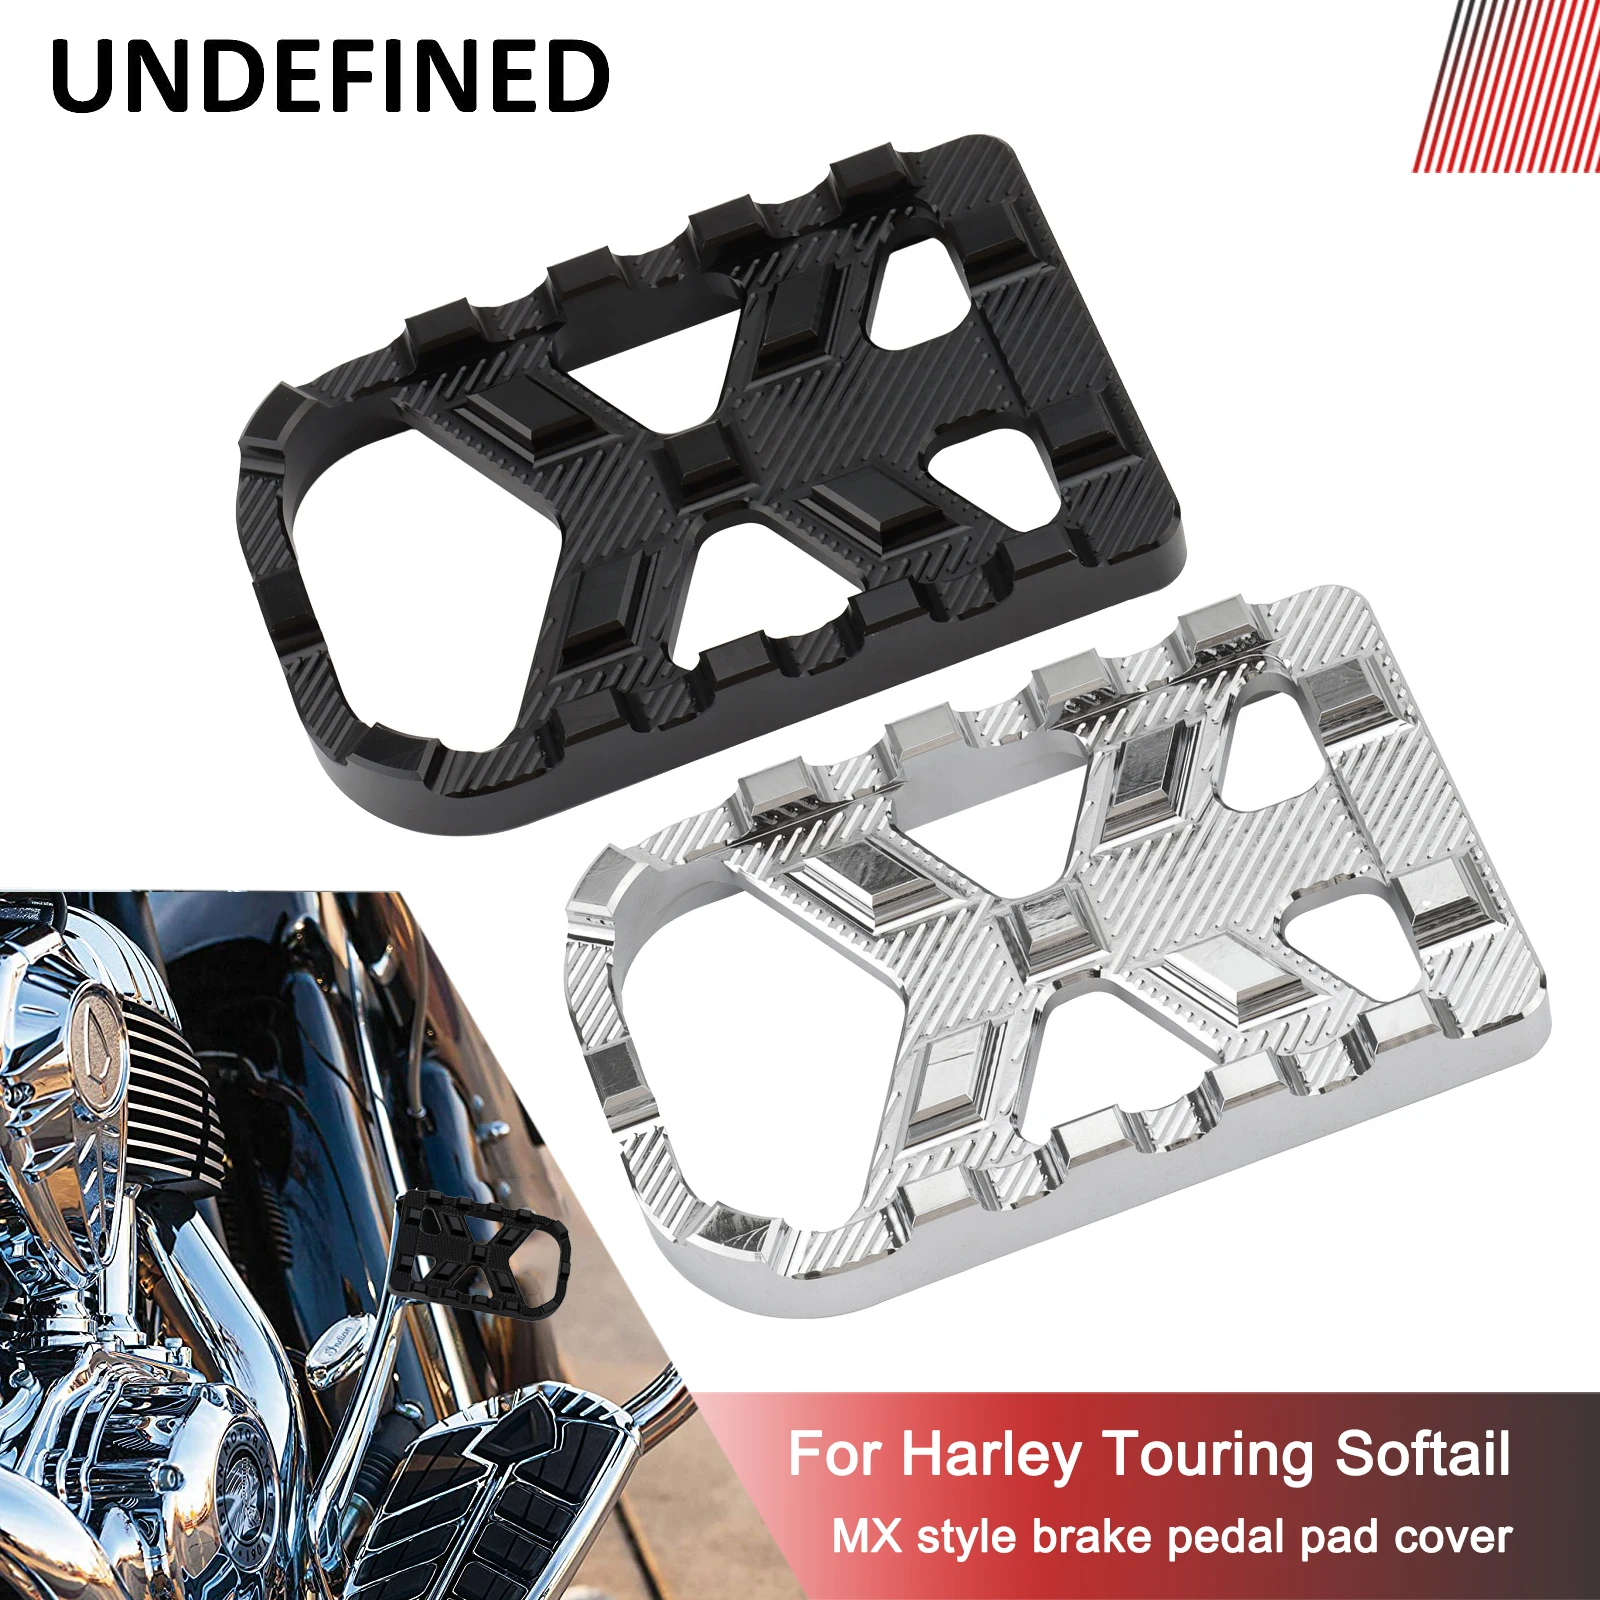 

Motorcycle Brake Pedal Cover MX Offroad Foot Pegs Pad for Harley Touring Street Glide Road King Softail Fat Boy Deluxe Dyna FLD